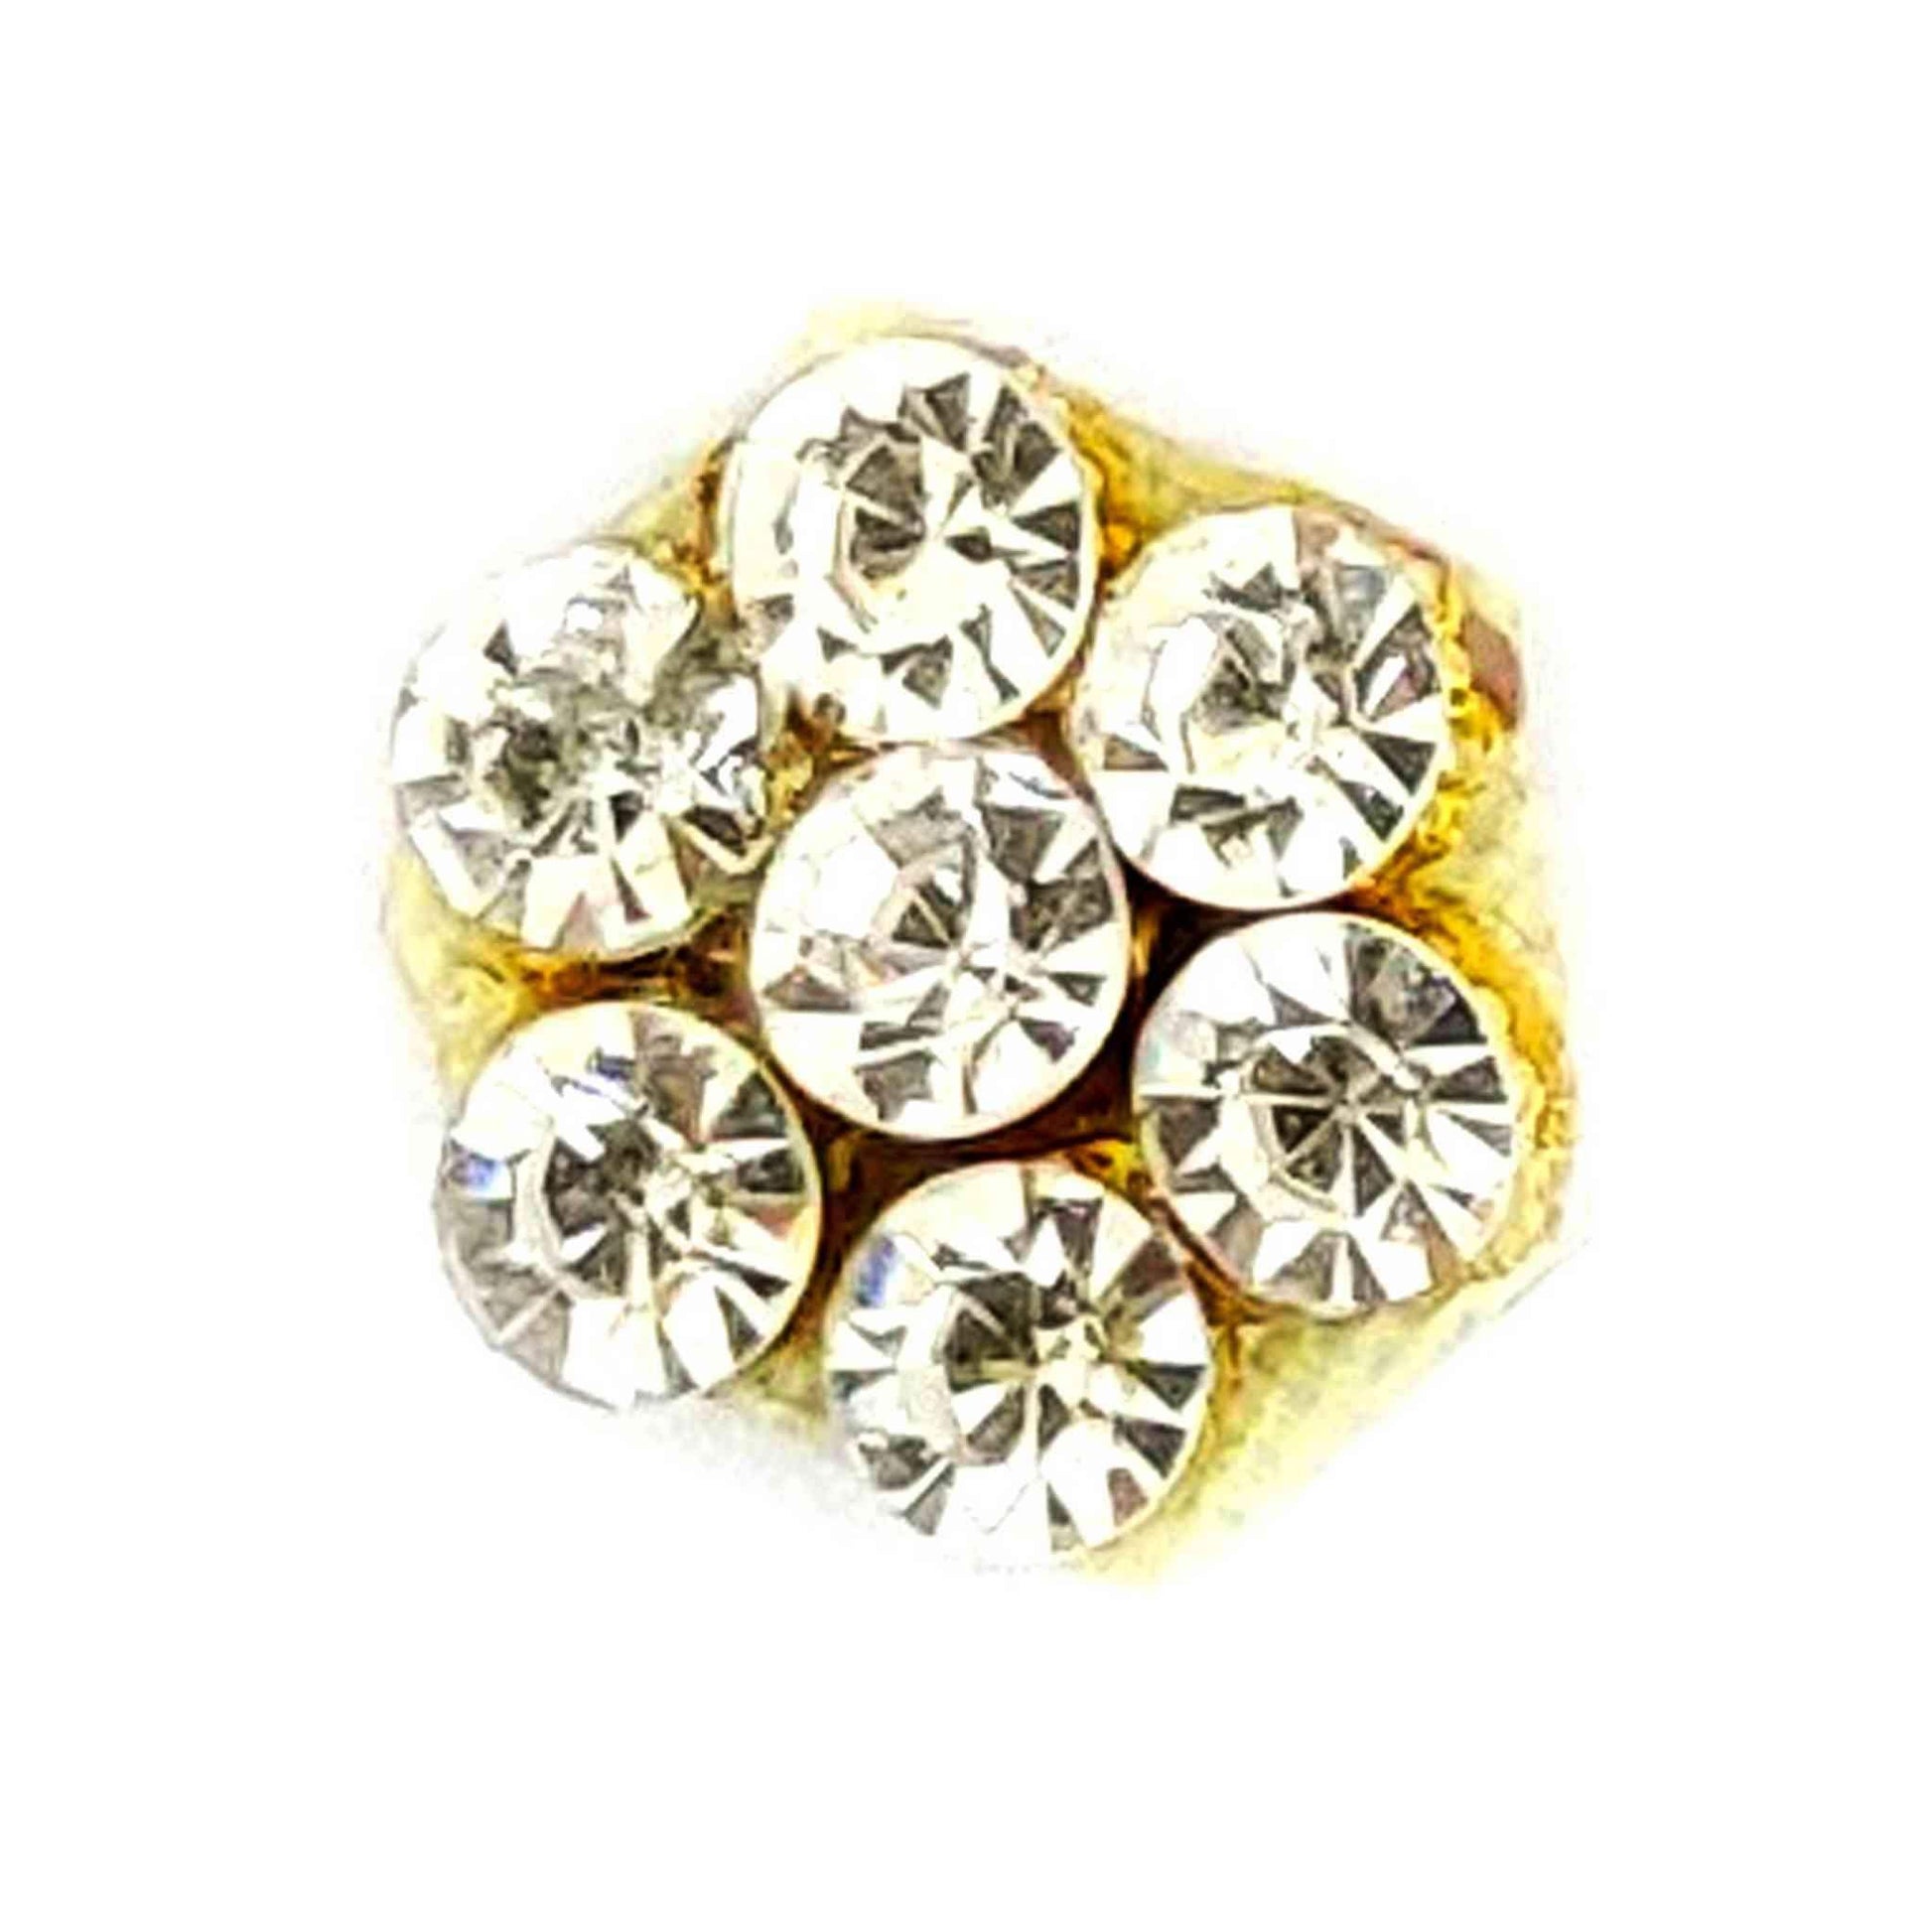 Indian Petals Studded Round Buti with Pearls for DIY Craft, Trousseau Packing or Decoration (Bunch of 12) - Design 236, Clear - Indian Petals